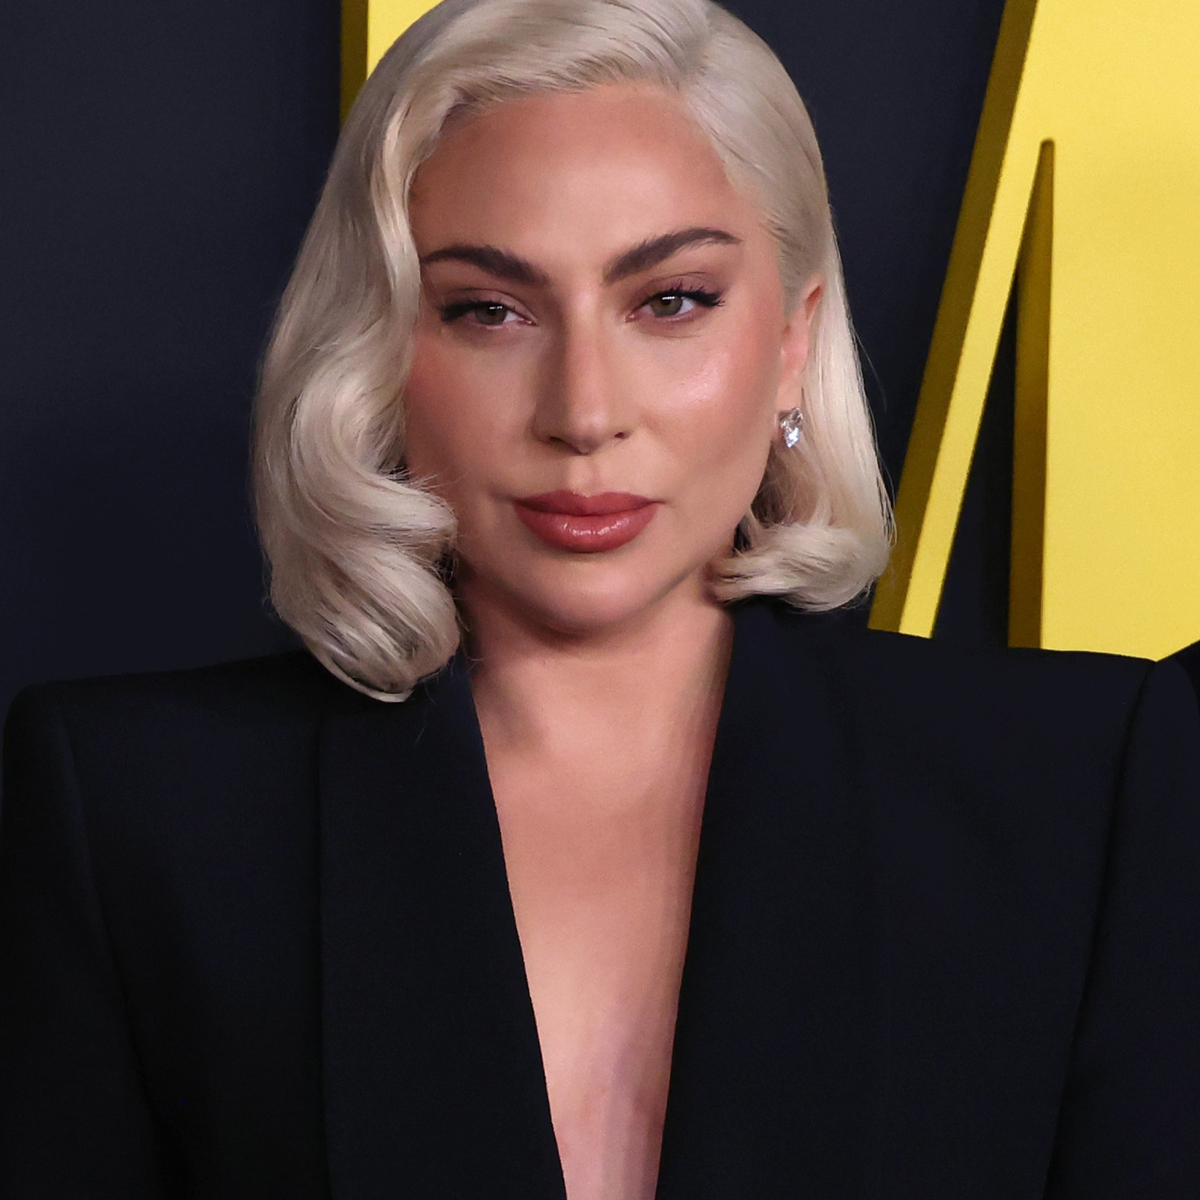 Lady Gaga Sparks Engagement Rumors With Boyfriend Michael Polansky With Applause-Worthy Diamond Ring